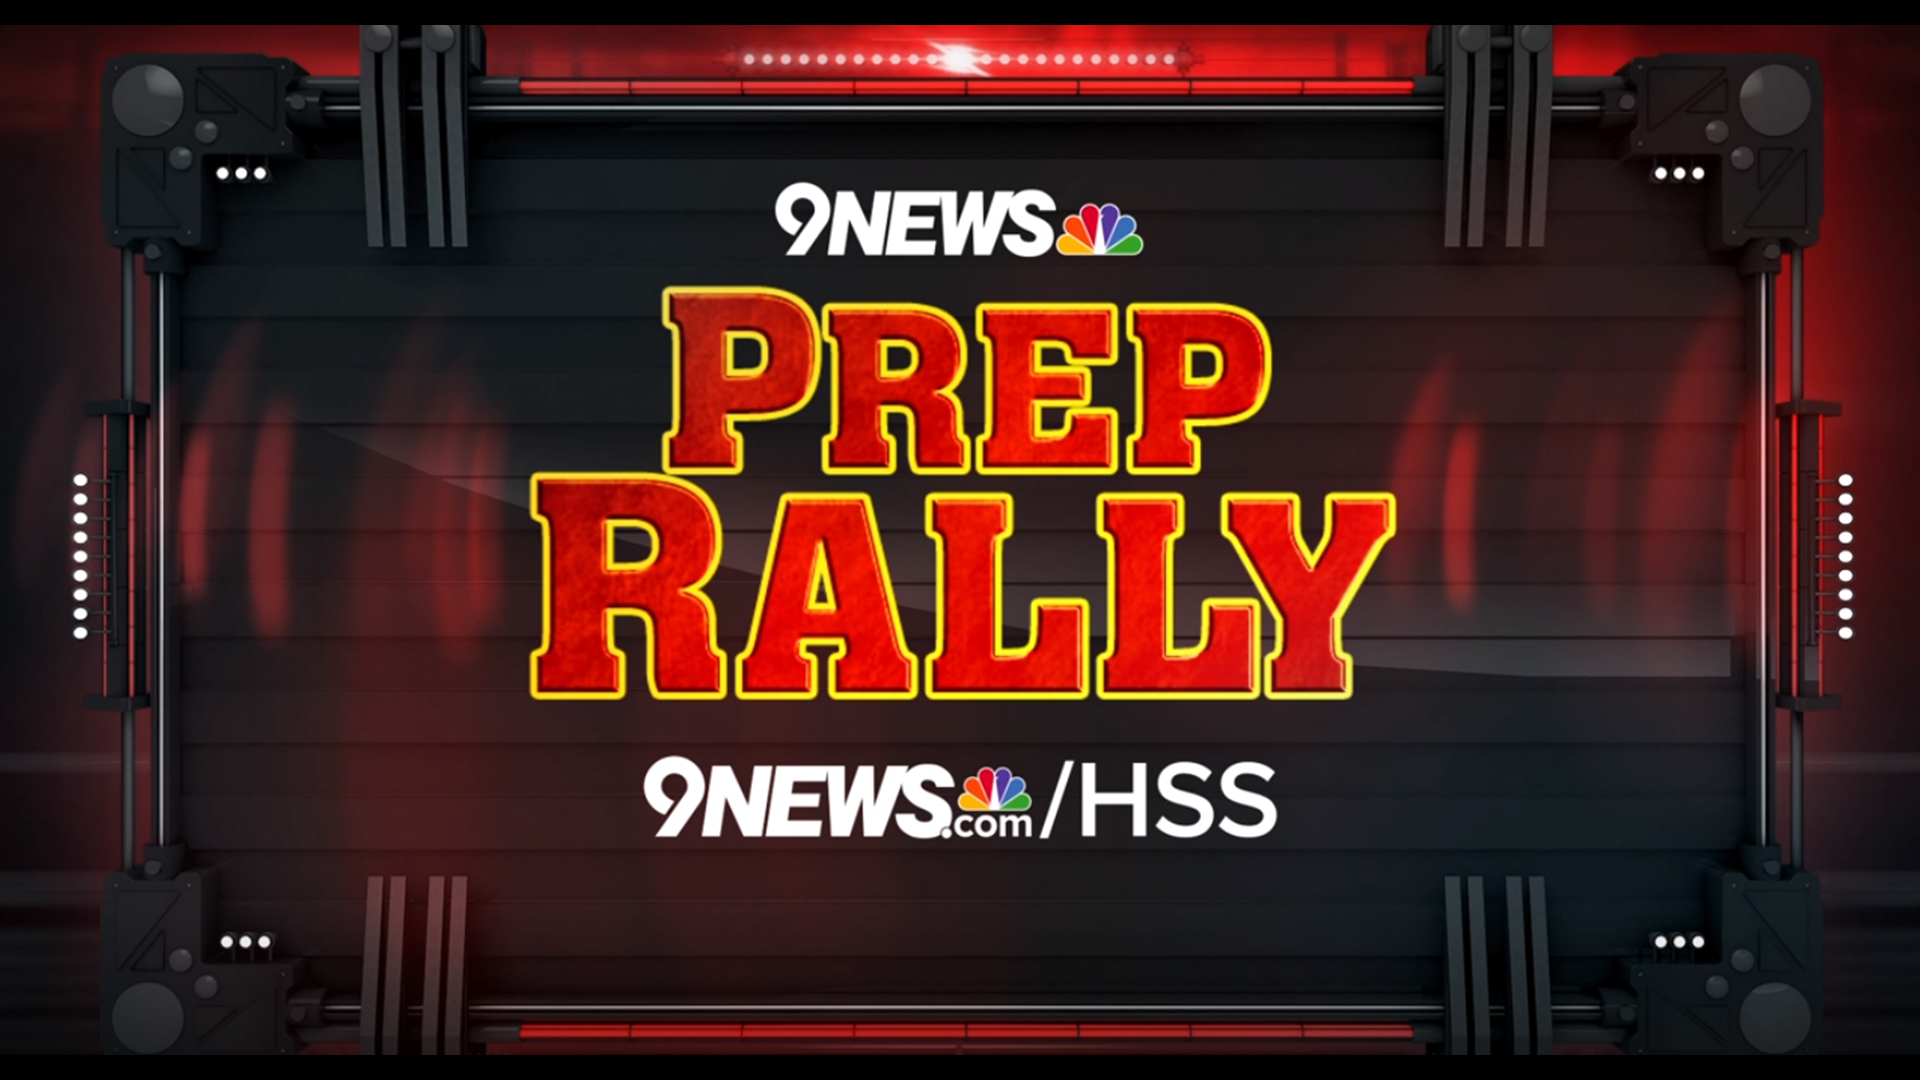 Included in Saturday's Prep Rally are highlights and a package on the 1999 Columbine football team.